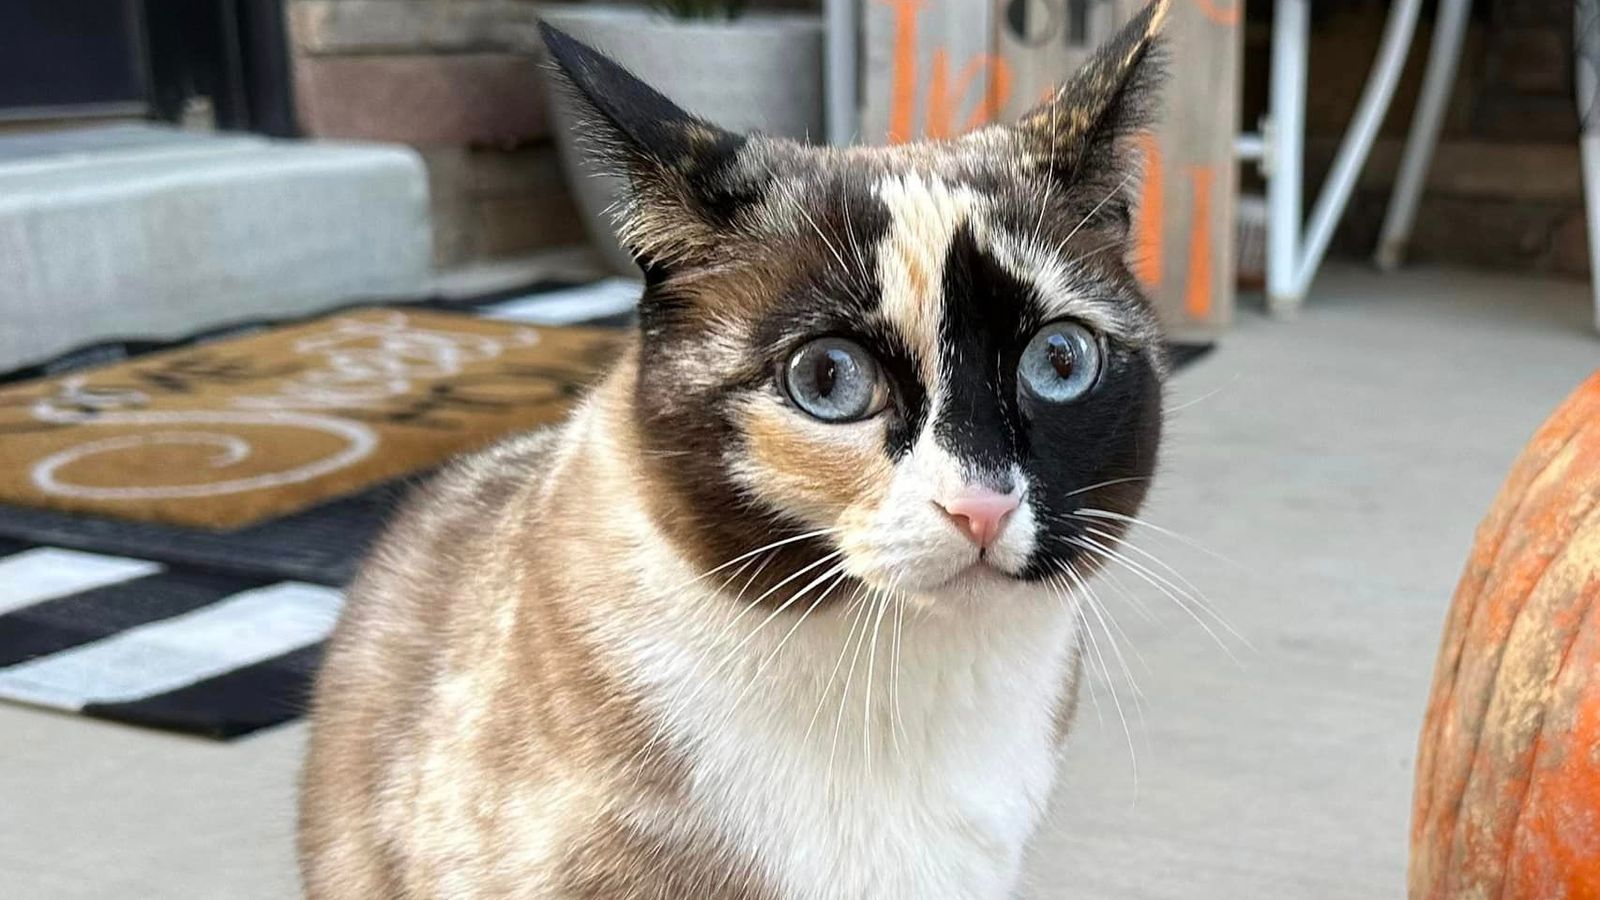 Utah pet cat discovered after week trapped inside Amazon return field to California